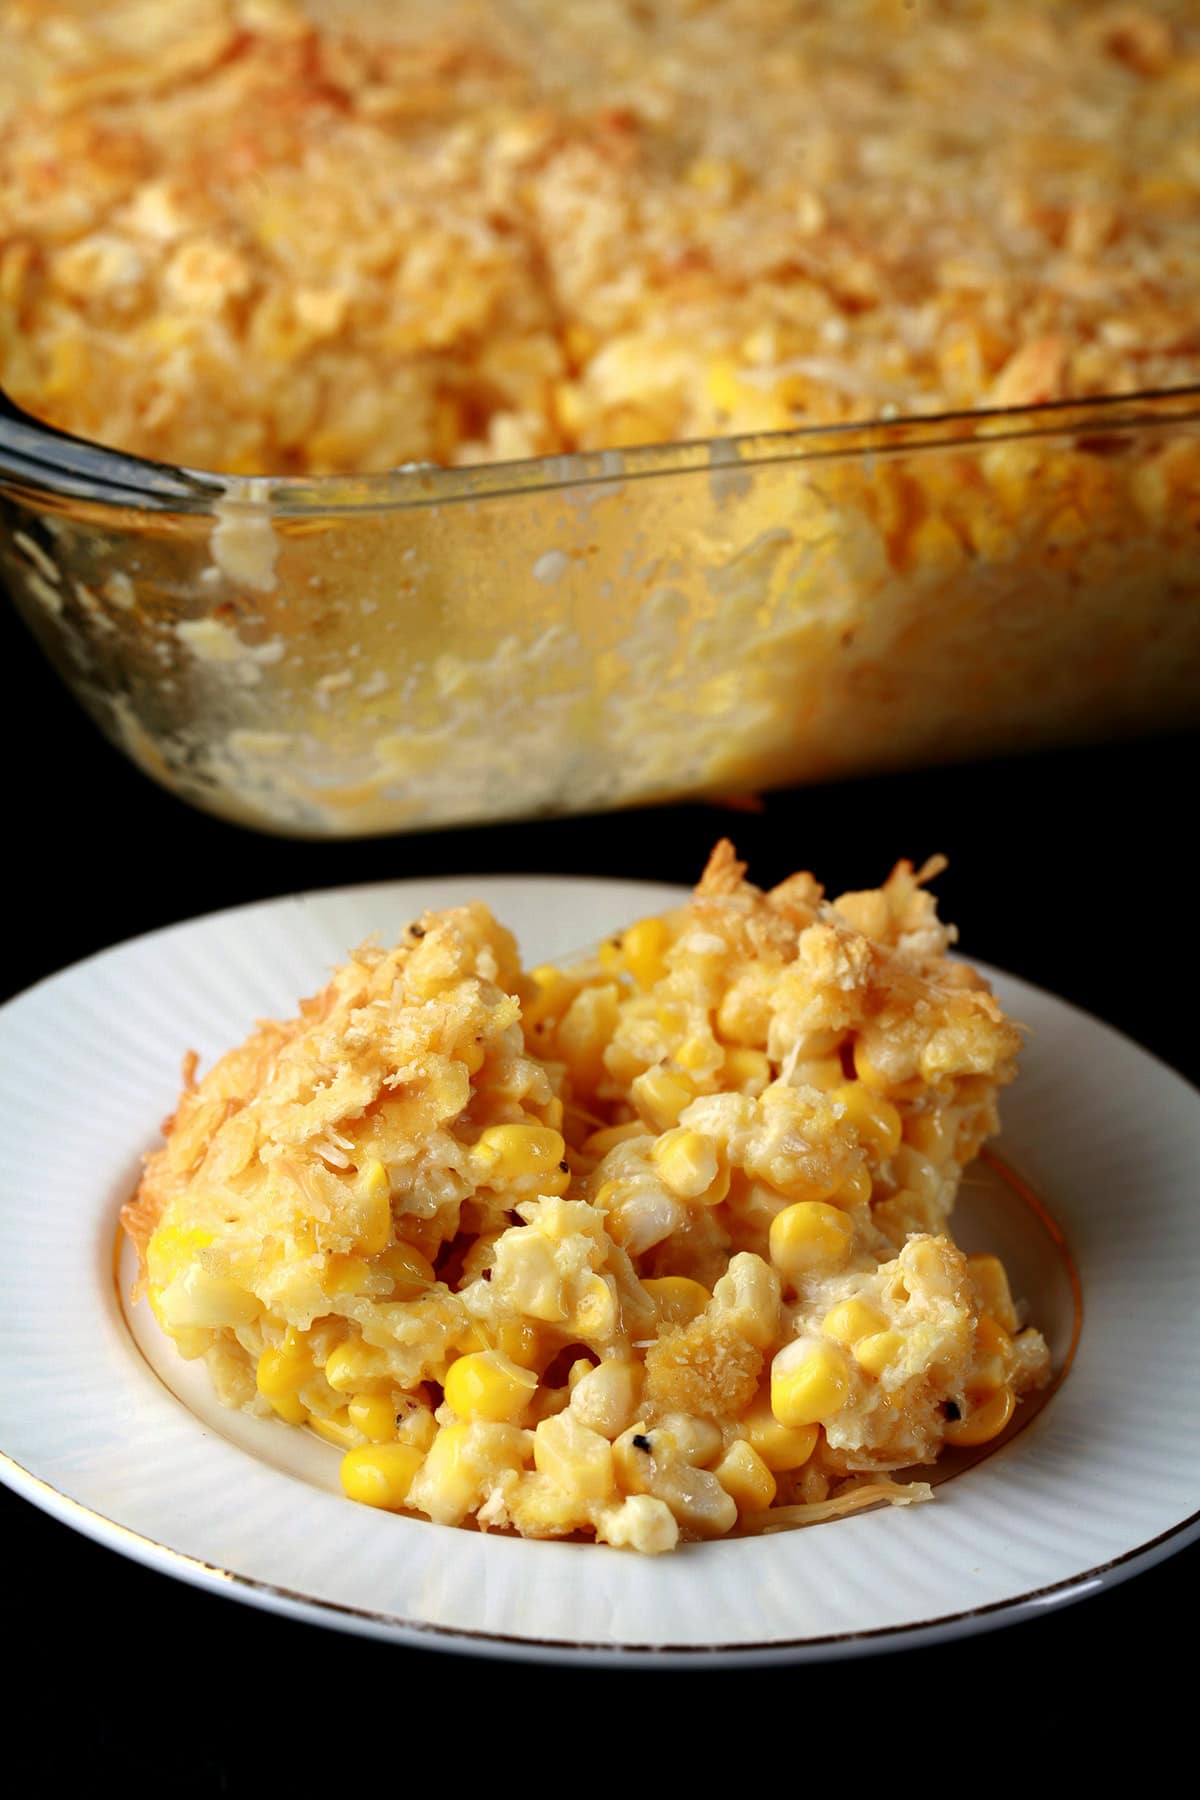 A serving of scalloped corn - fresh sweet corn, cheese, crackers, and more - on a small white plate. The pan of casserole it was served from sits behind the plate.